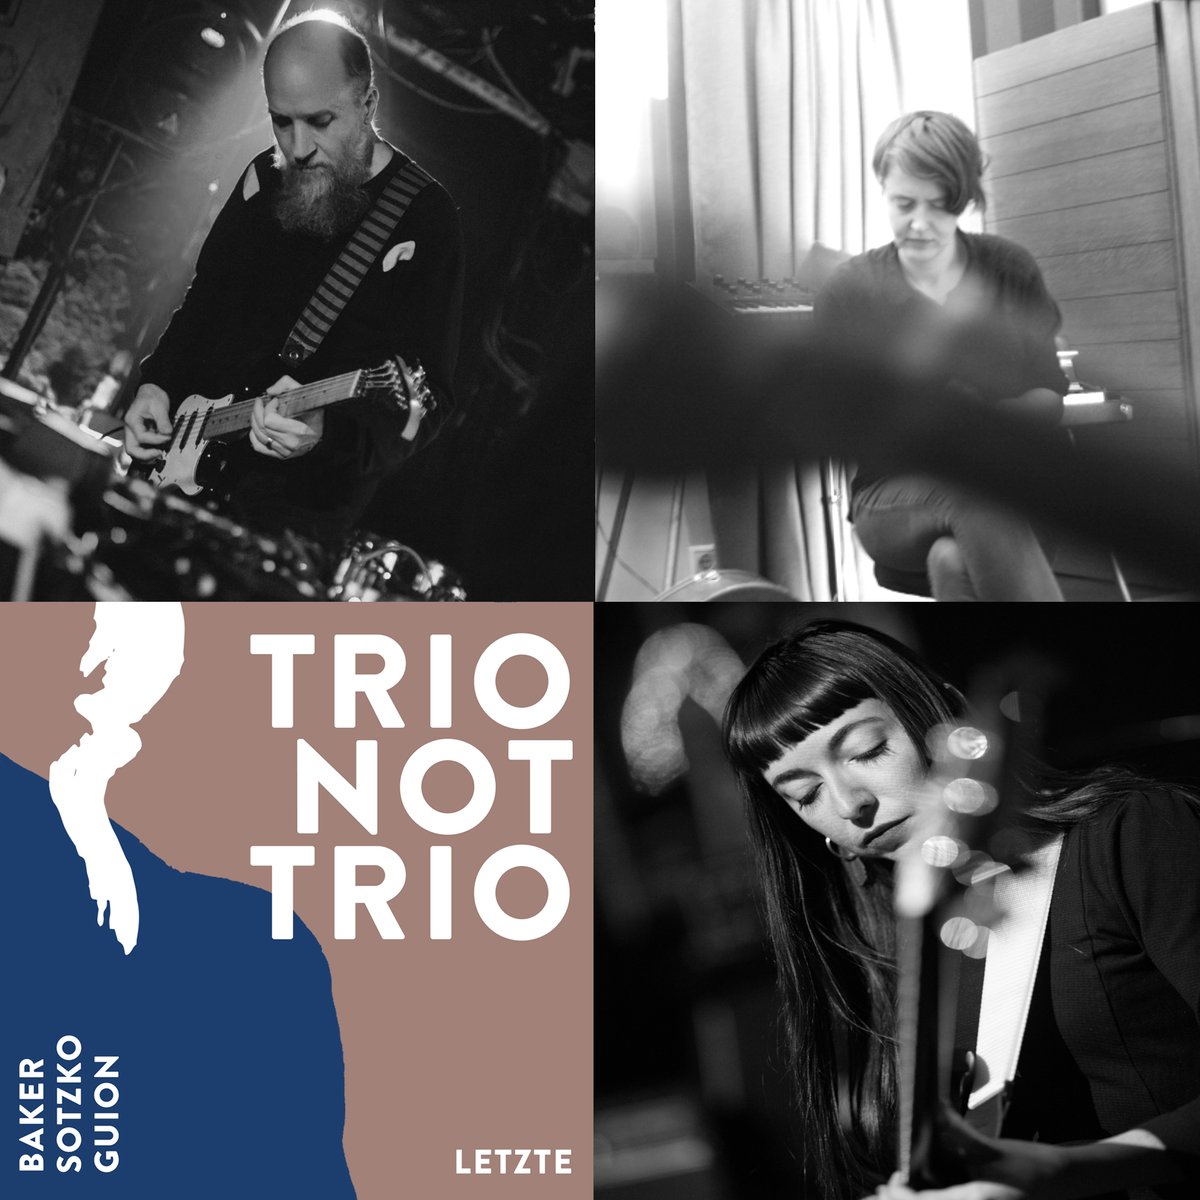 The fifth and final instalment of Aidan Baker's highly ambitious Trio Not Trio series is out today! Letzte features Jana Sotzko (Dropout Patrol, Point No Point etc) and Melissa Guion (@mjguider) gizehrecords.bandcamp.com/album/trio-not…